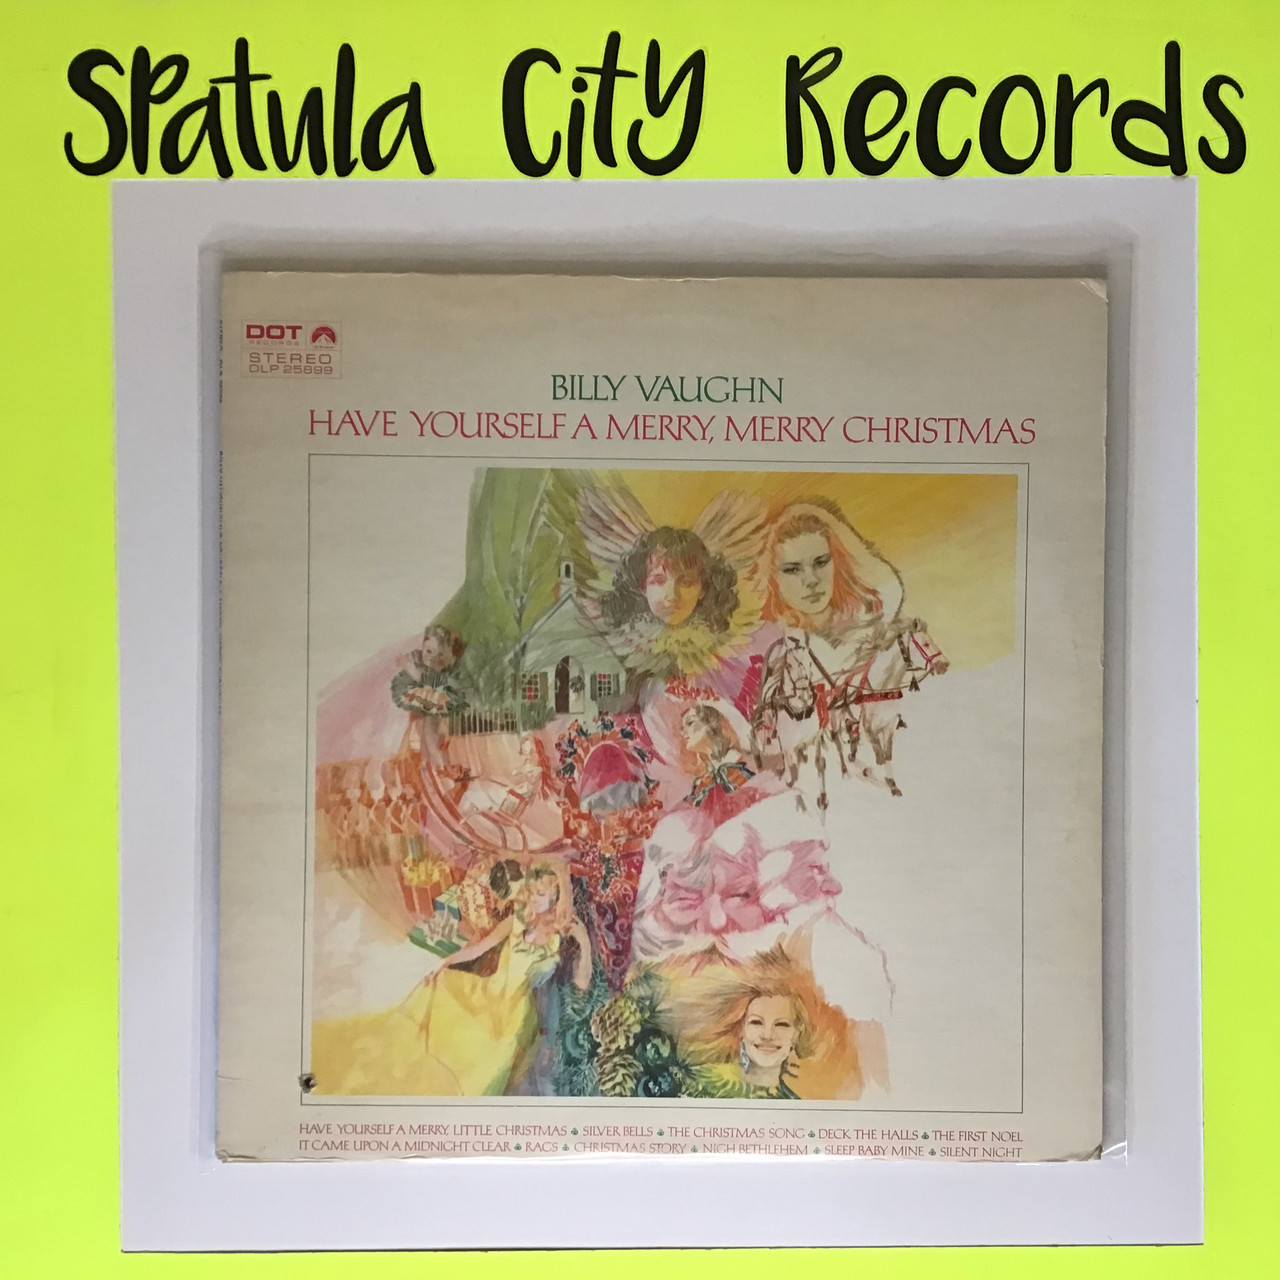 Billy Vaughn - Have yourself a Merry Merry Christmas - Vinyl record album LP